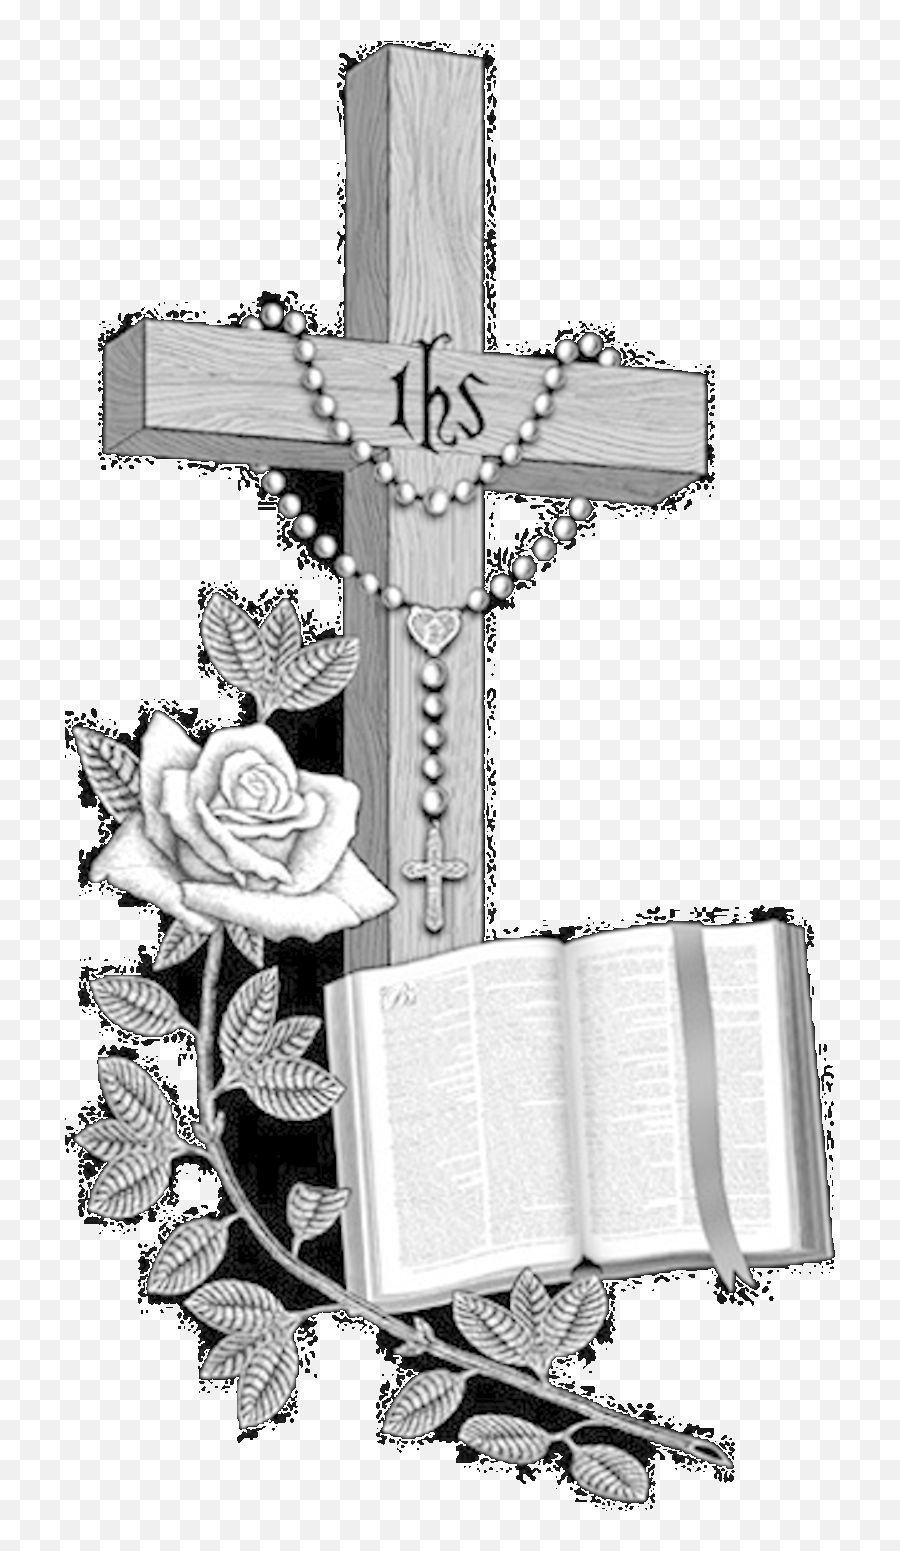 Gravestone Clipart Tombstone Cross - Cross Praying Hands With Rosary Emoji,Tombstone Clipart